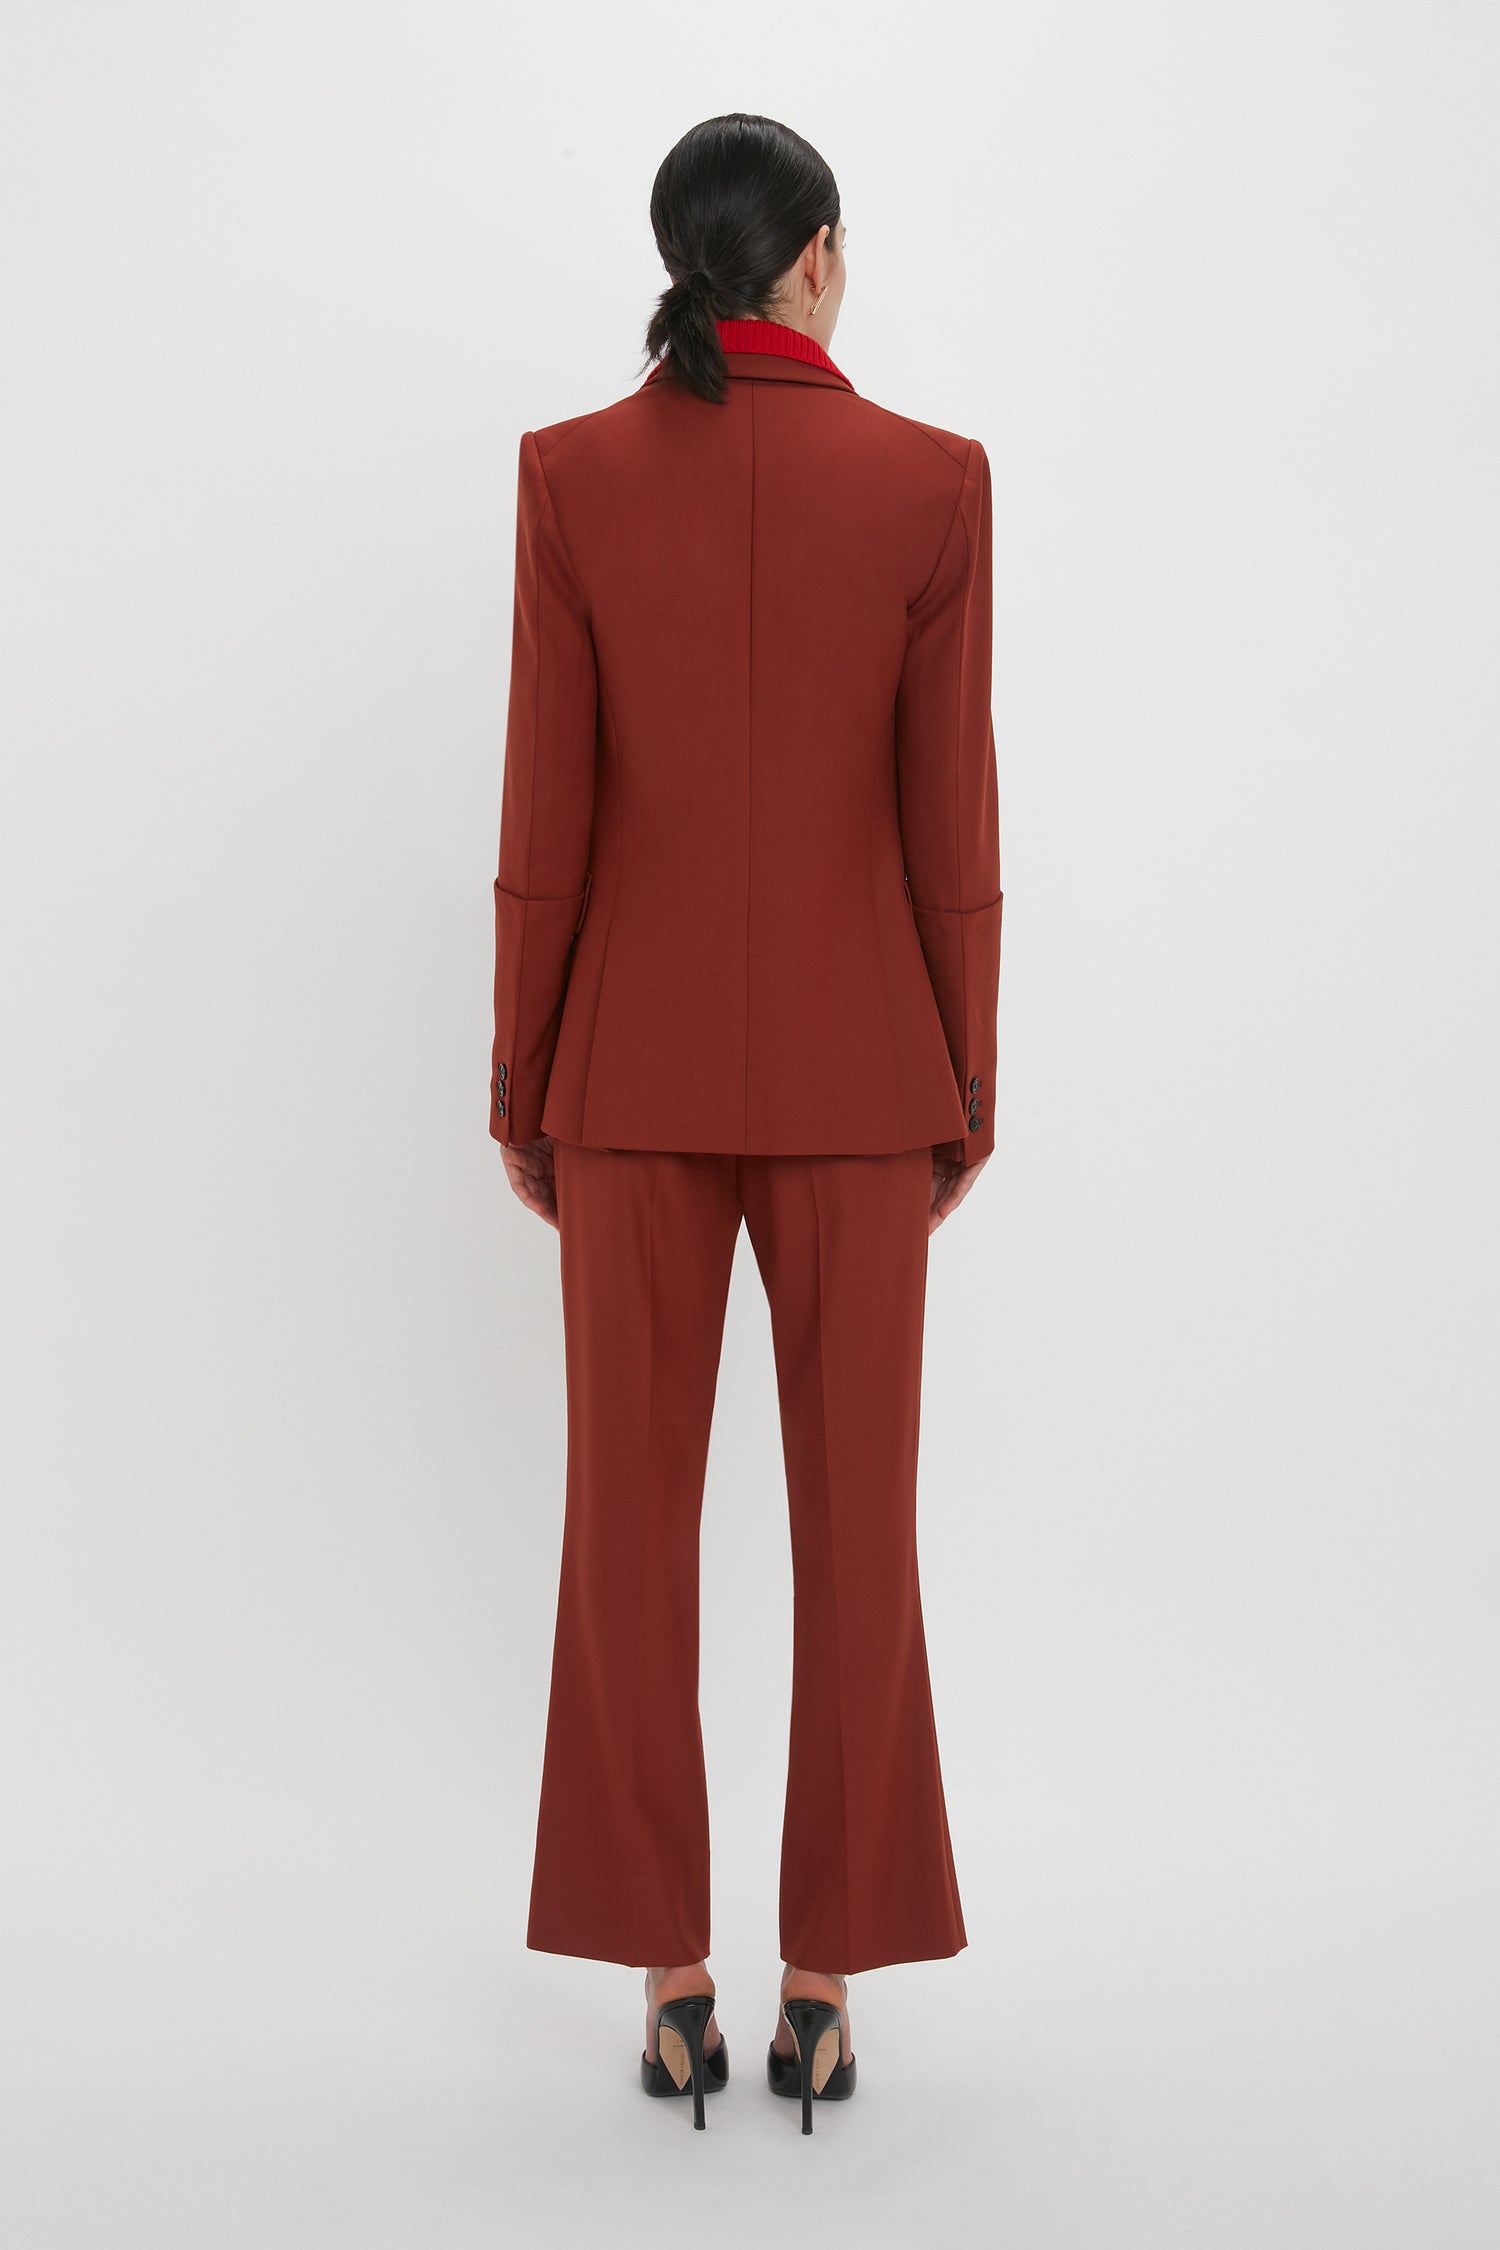 A person with black hair in a ponytail is standing with their back to the camera, wearing a red tailored suit featuring Victoria Beckham's Wide Cropped Flare Trouser In Russet and black heeled shoes against a plain white background.